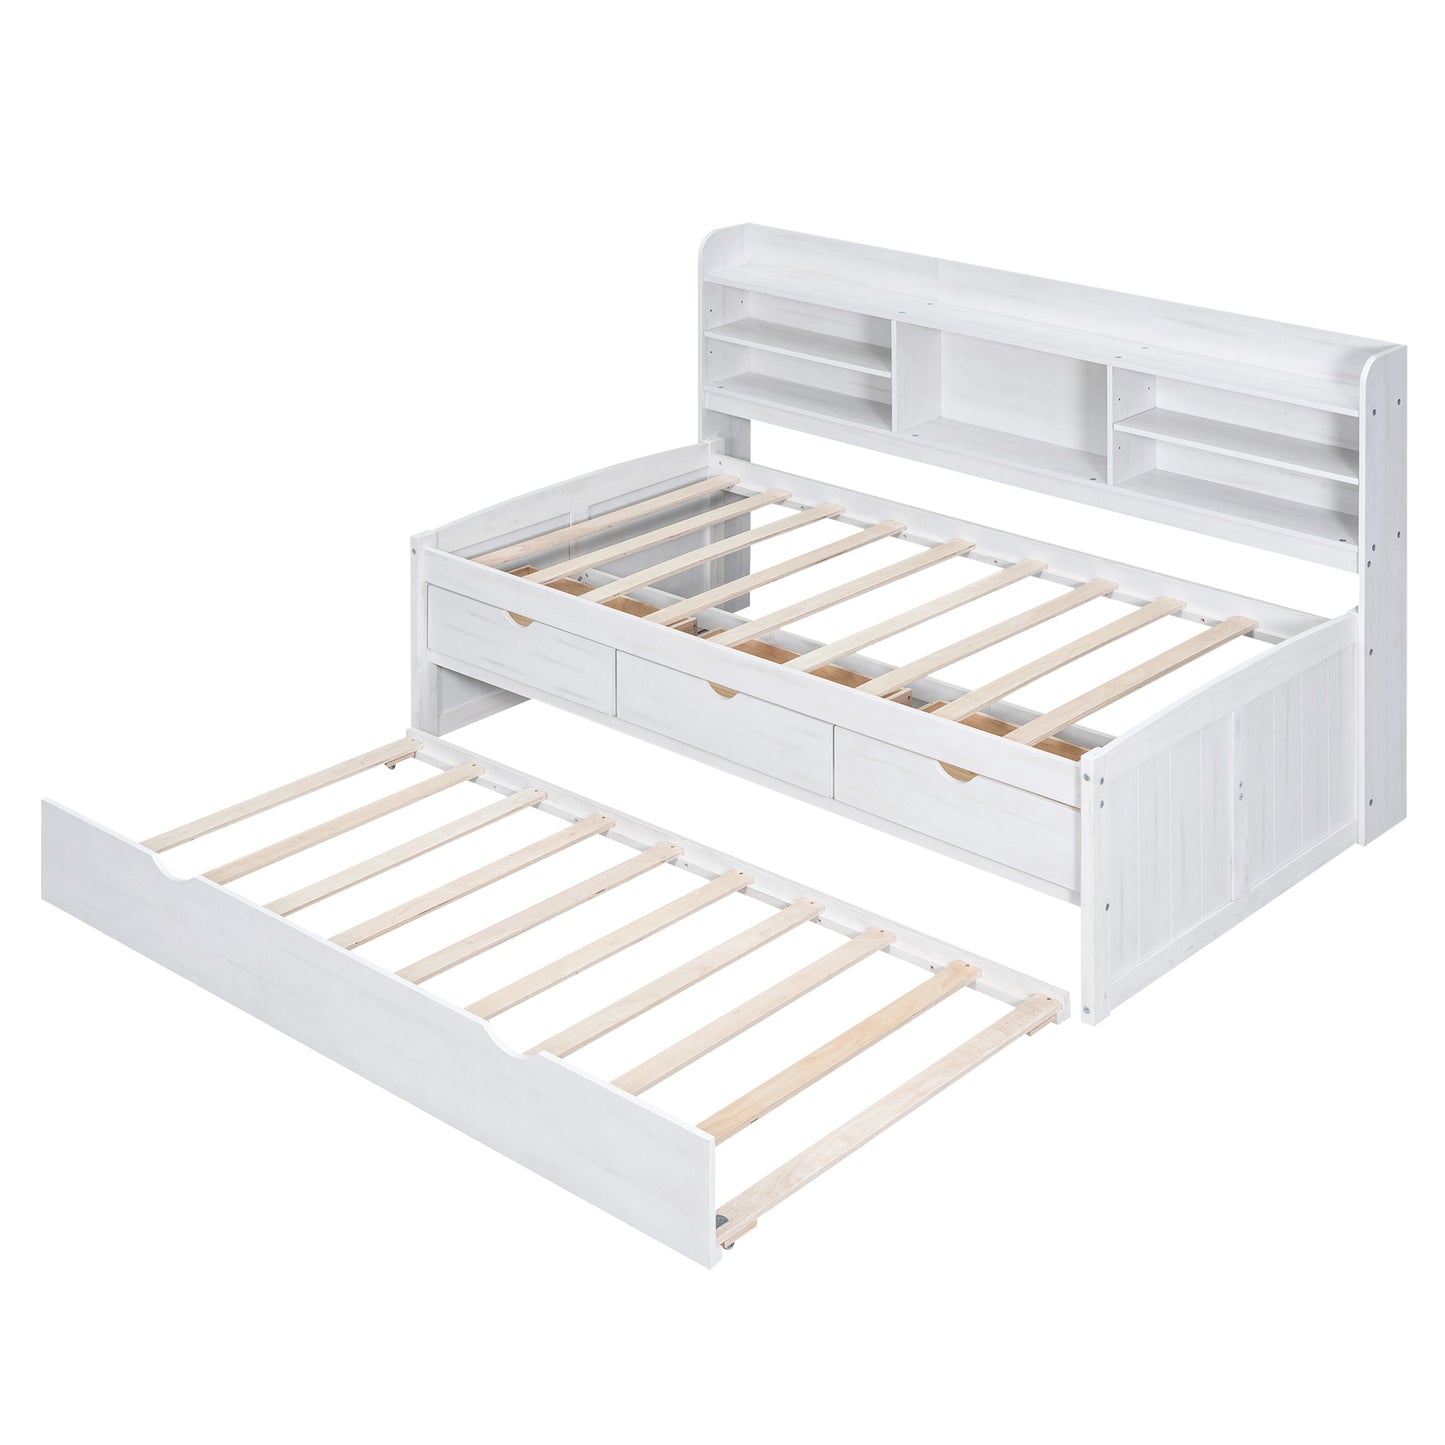 Twin Size Wooden Captain Platform Bed with Built-in Bookshelves, 3 Storage Drawers and Trundle, White Wash